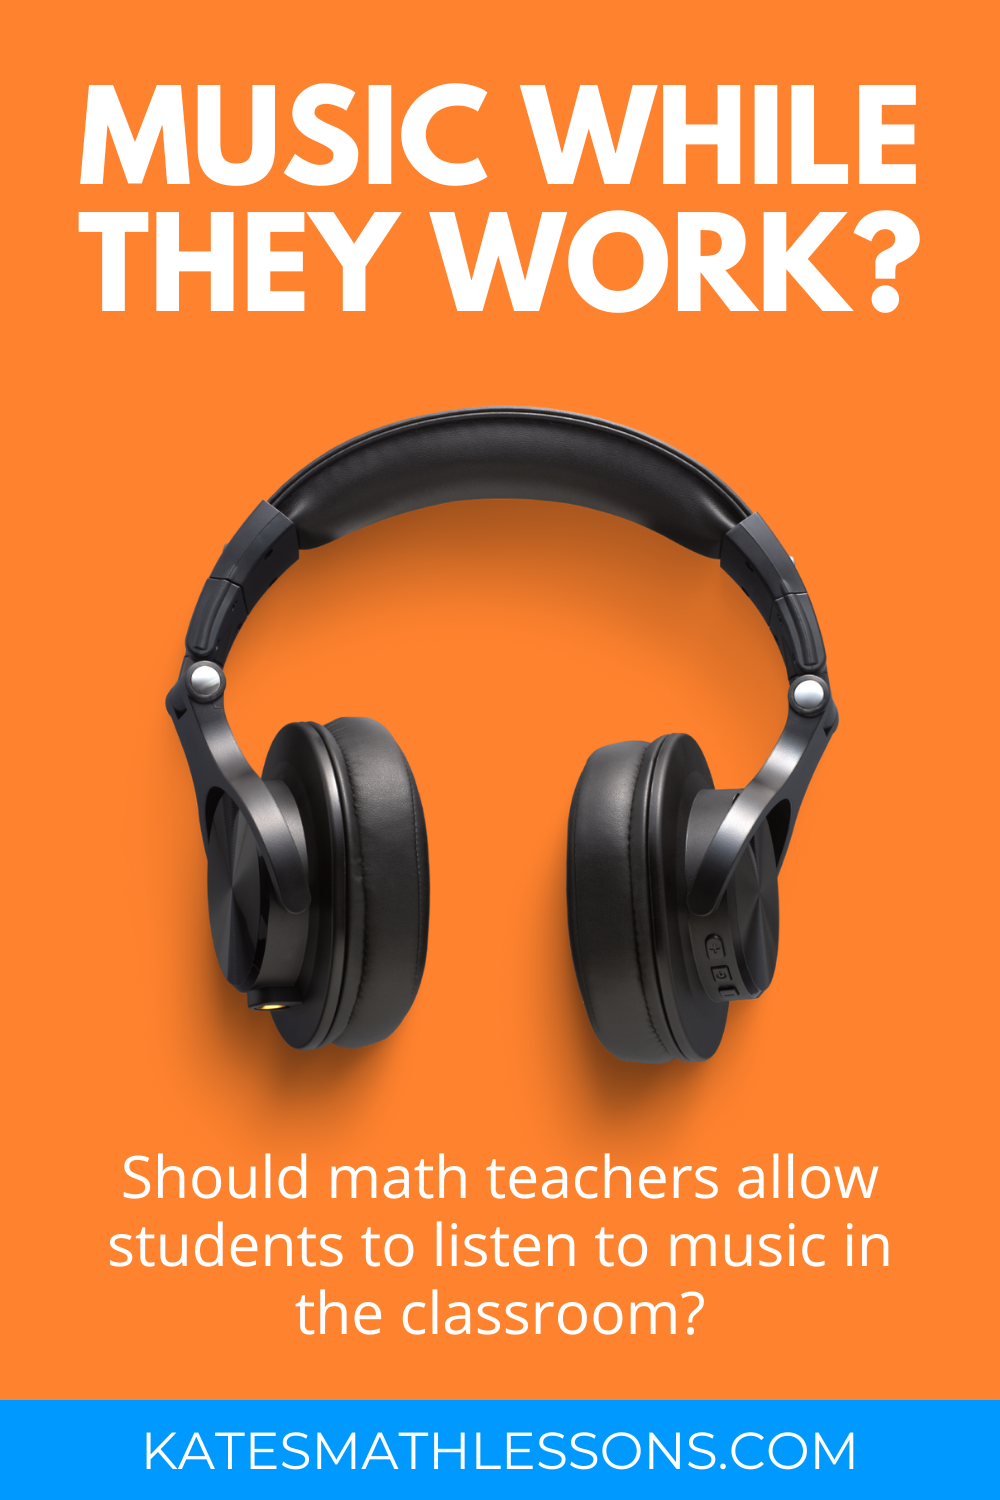 Should math teachers allow students to listen to music in the classroom?